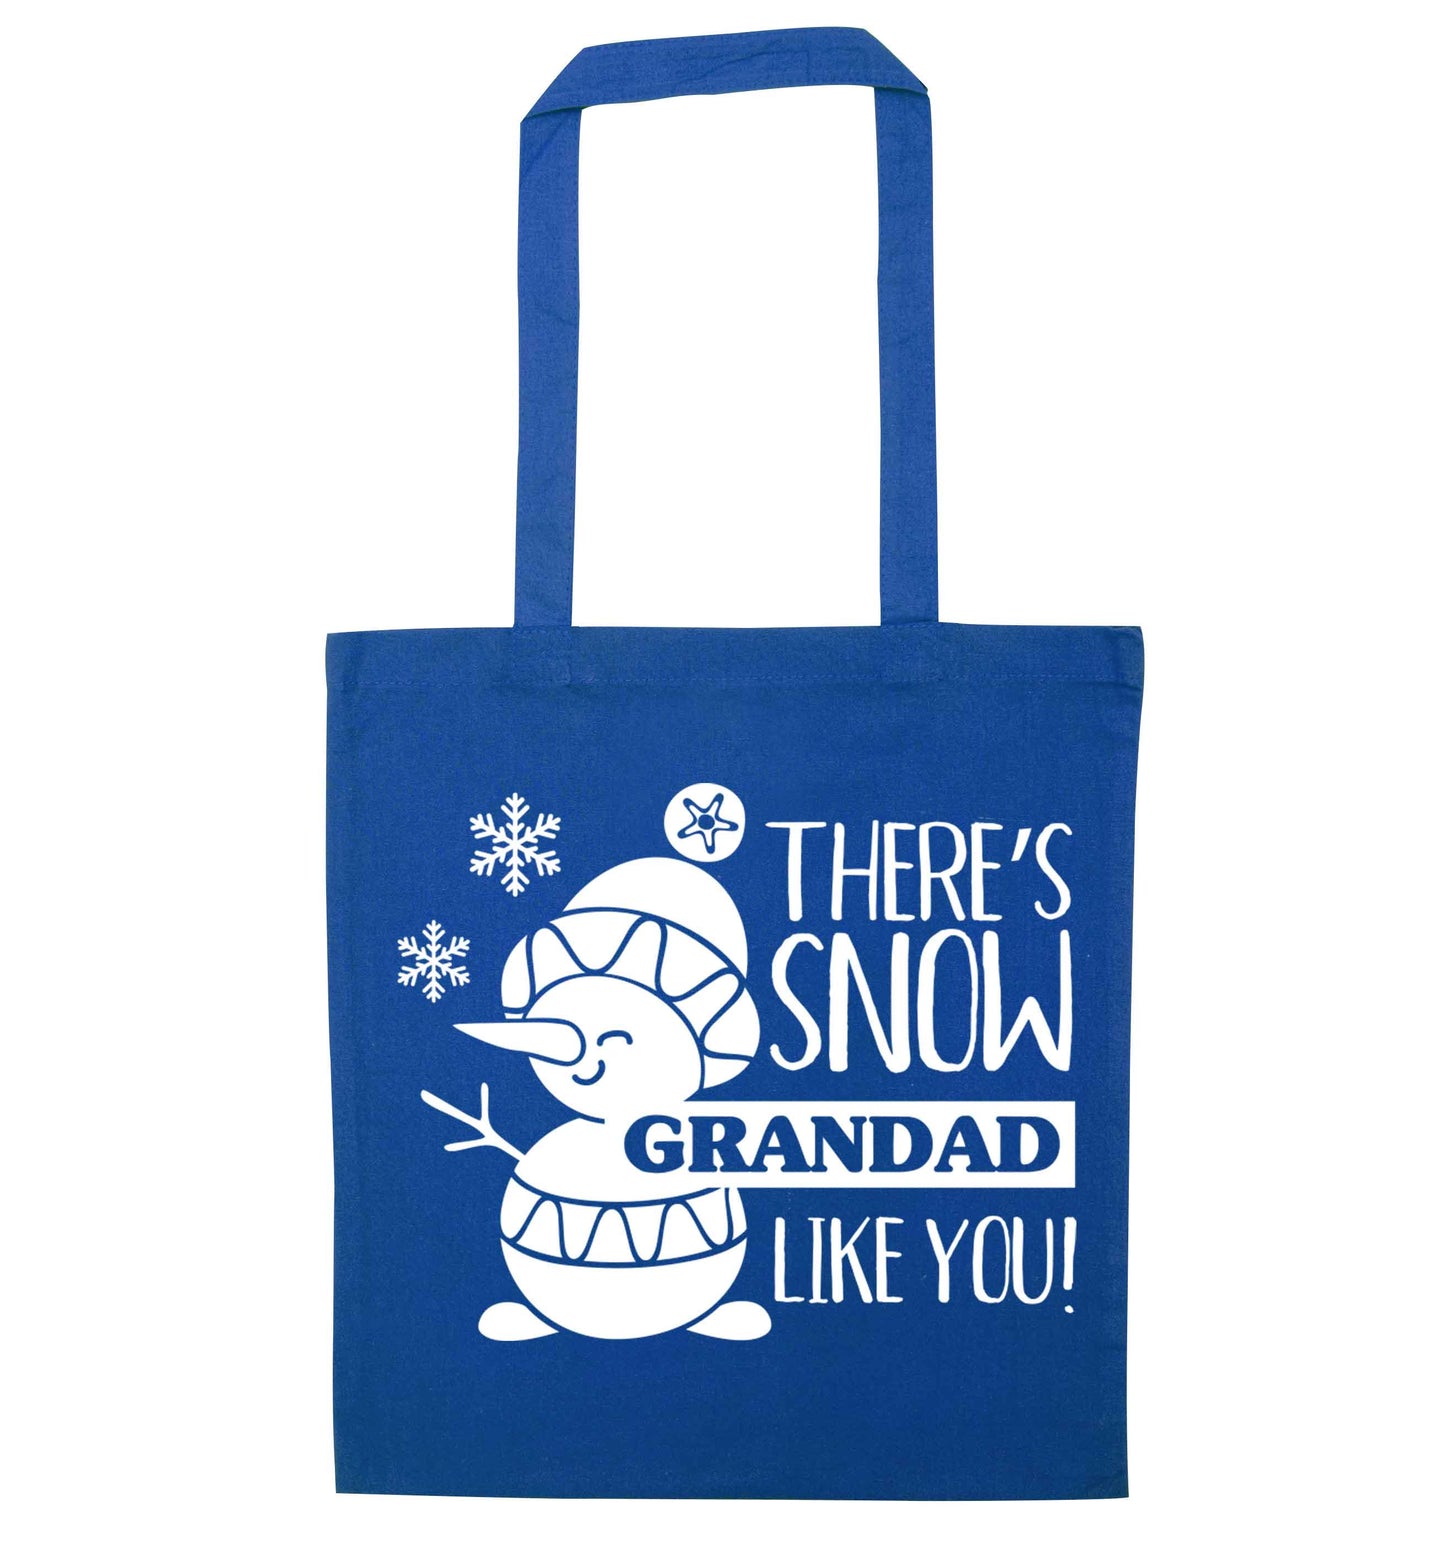 There's snow grandad like you blue tote bag